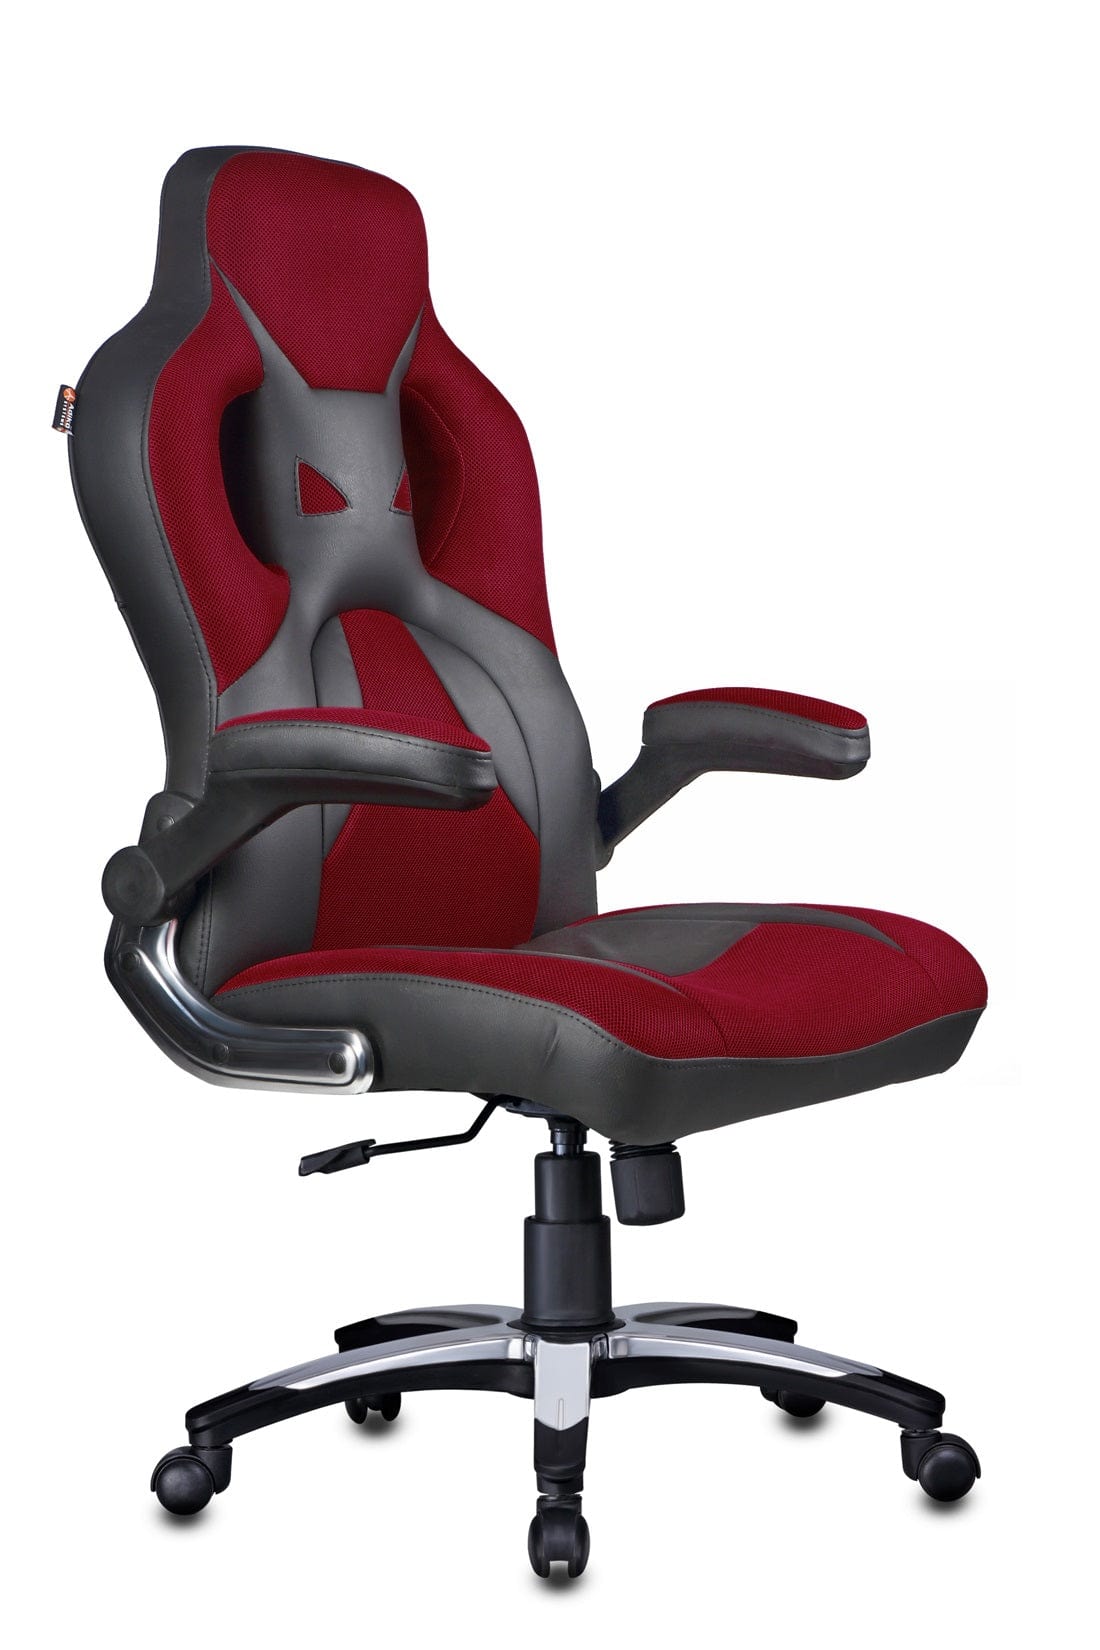 Stylish Designer Office chair in Black / Red